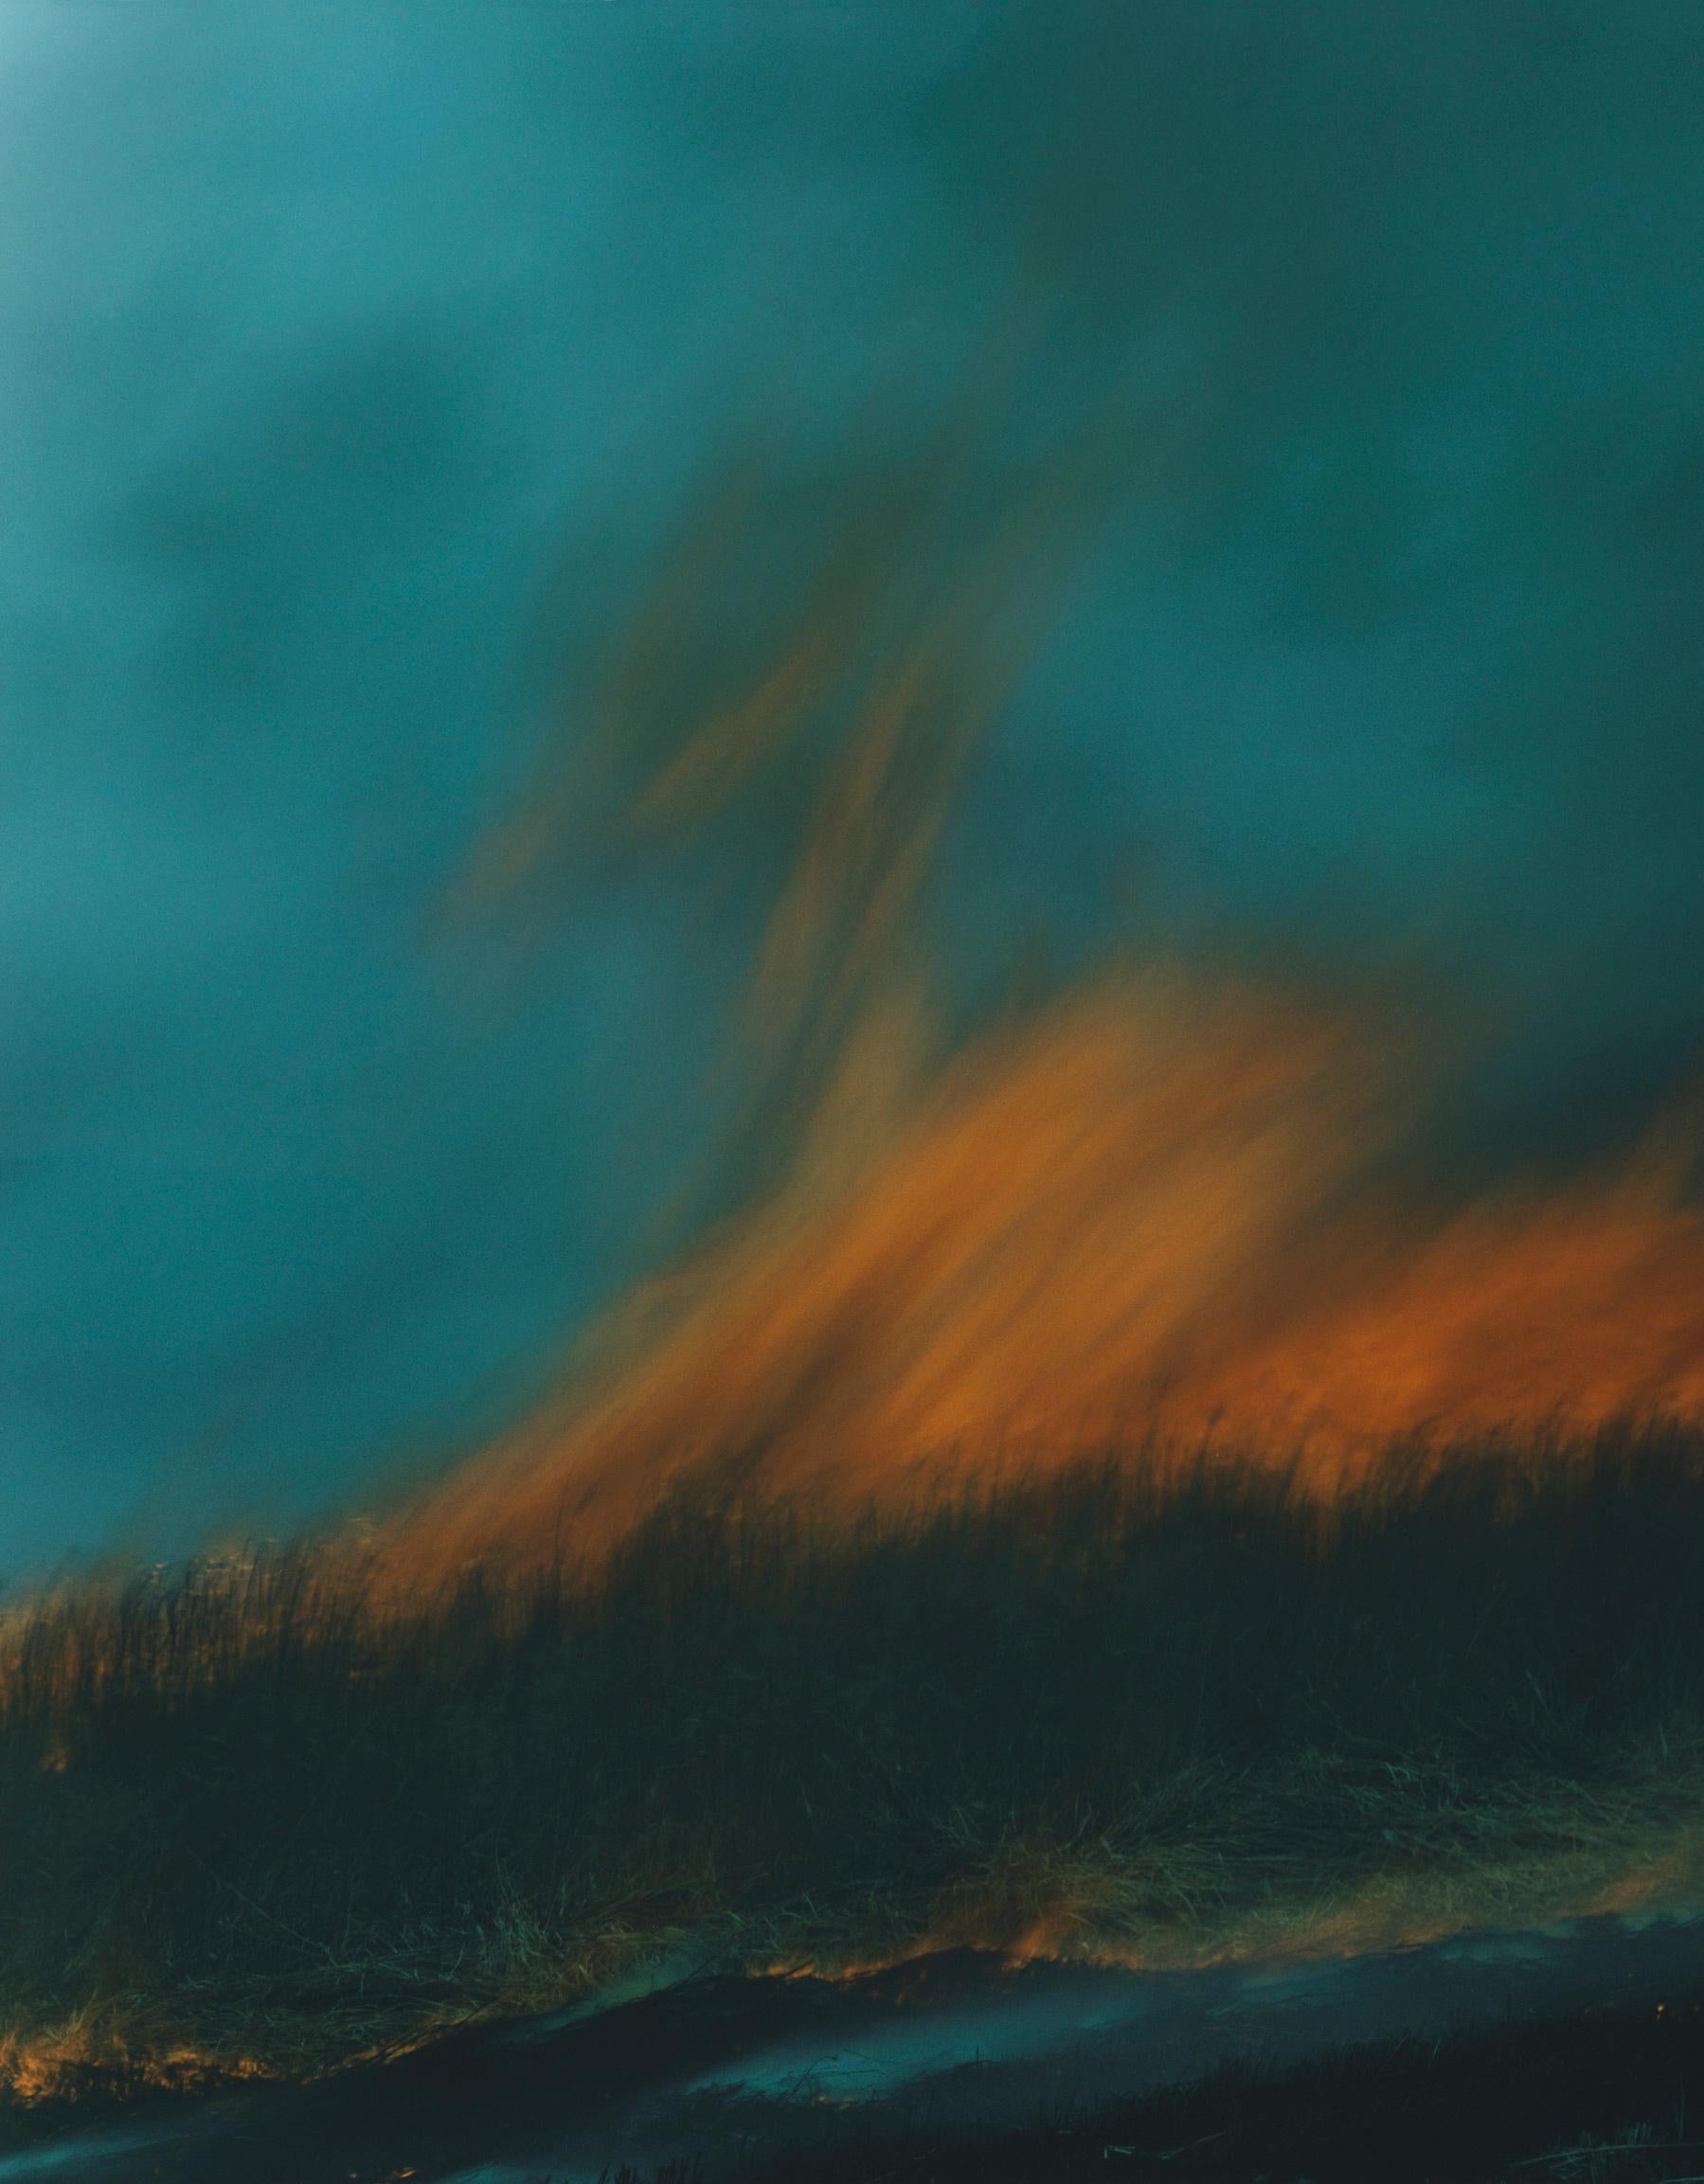 Rinko KAWAUCHI (*1972, Japan)
Untitled, from the series 'Ametsuchi', 2013
Lambda print
Sheet 148 x 185 cm (58 1/4 x 72 7/8 in.) 
Edition of 3; Ed. no. 2/3
Print only

Kawauchi, currently one of the most famed contemporary female Asian artists, is a